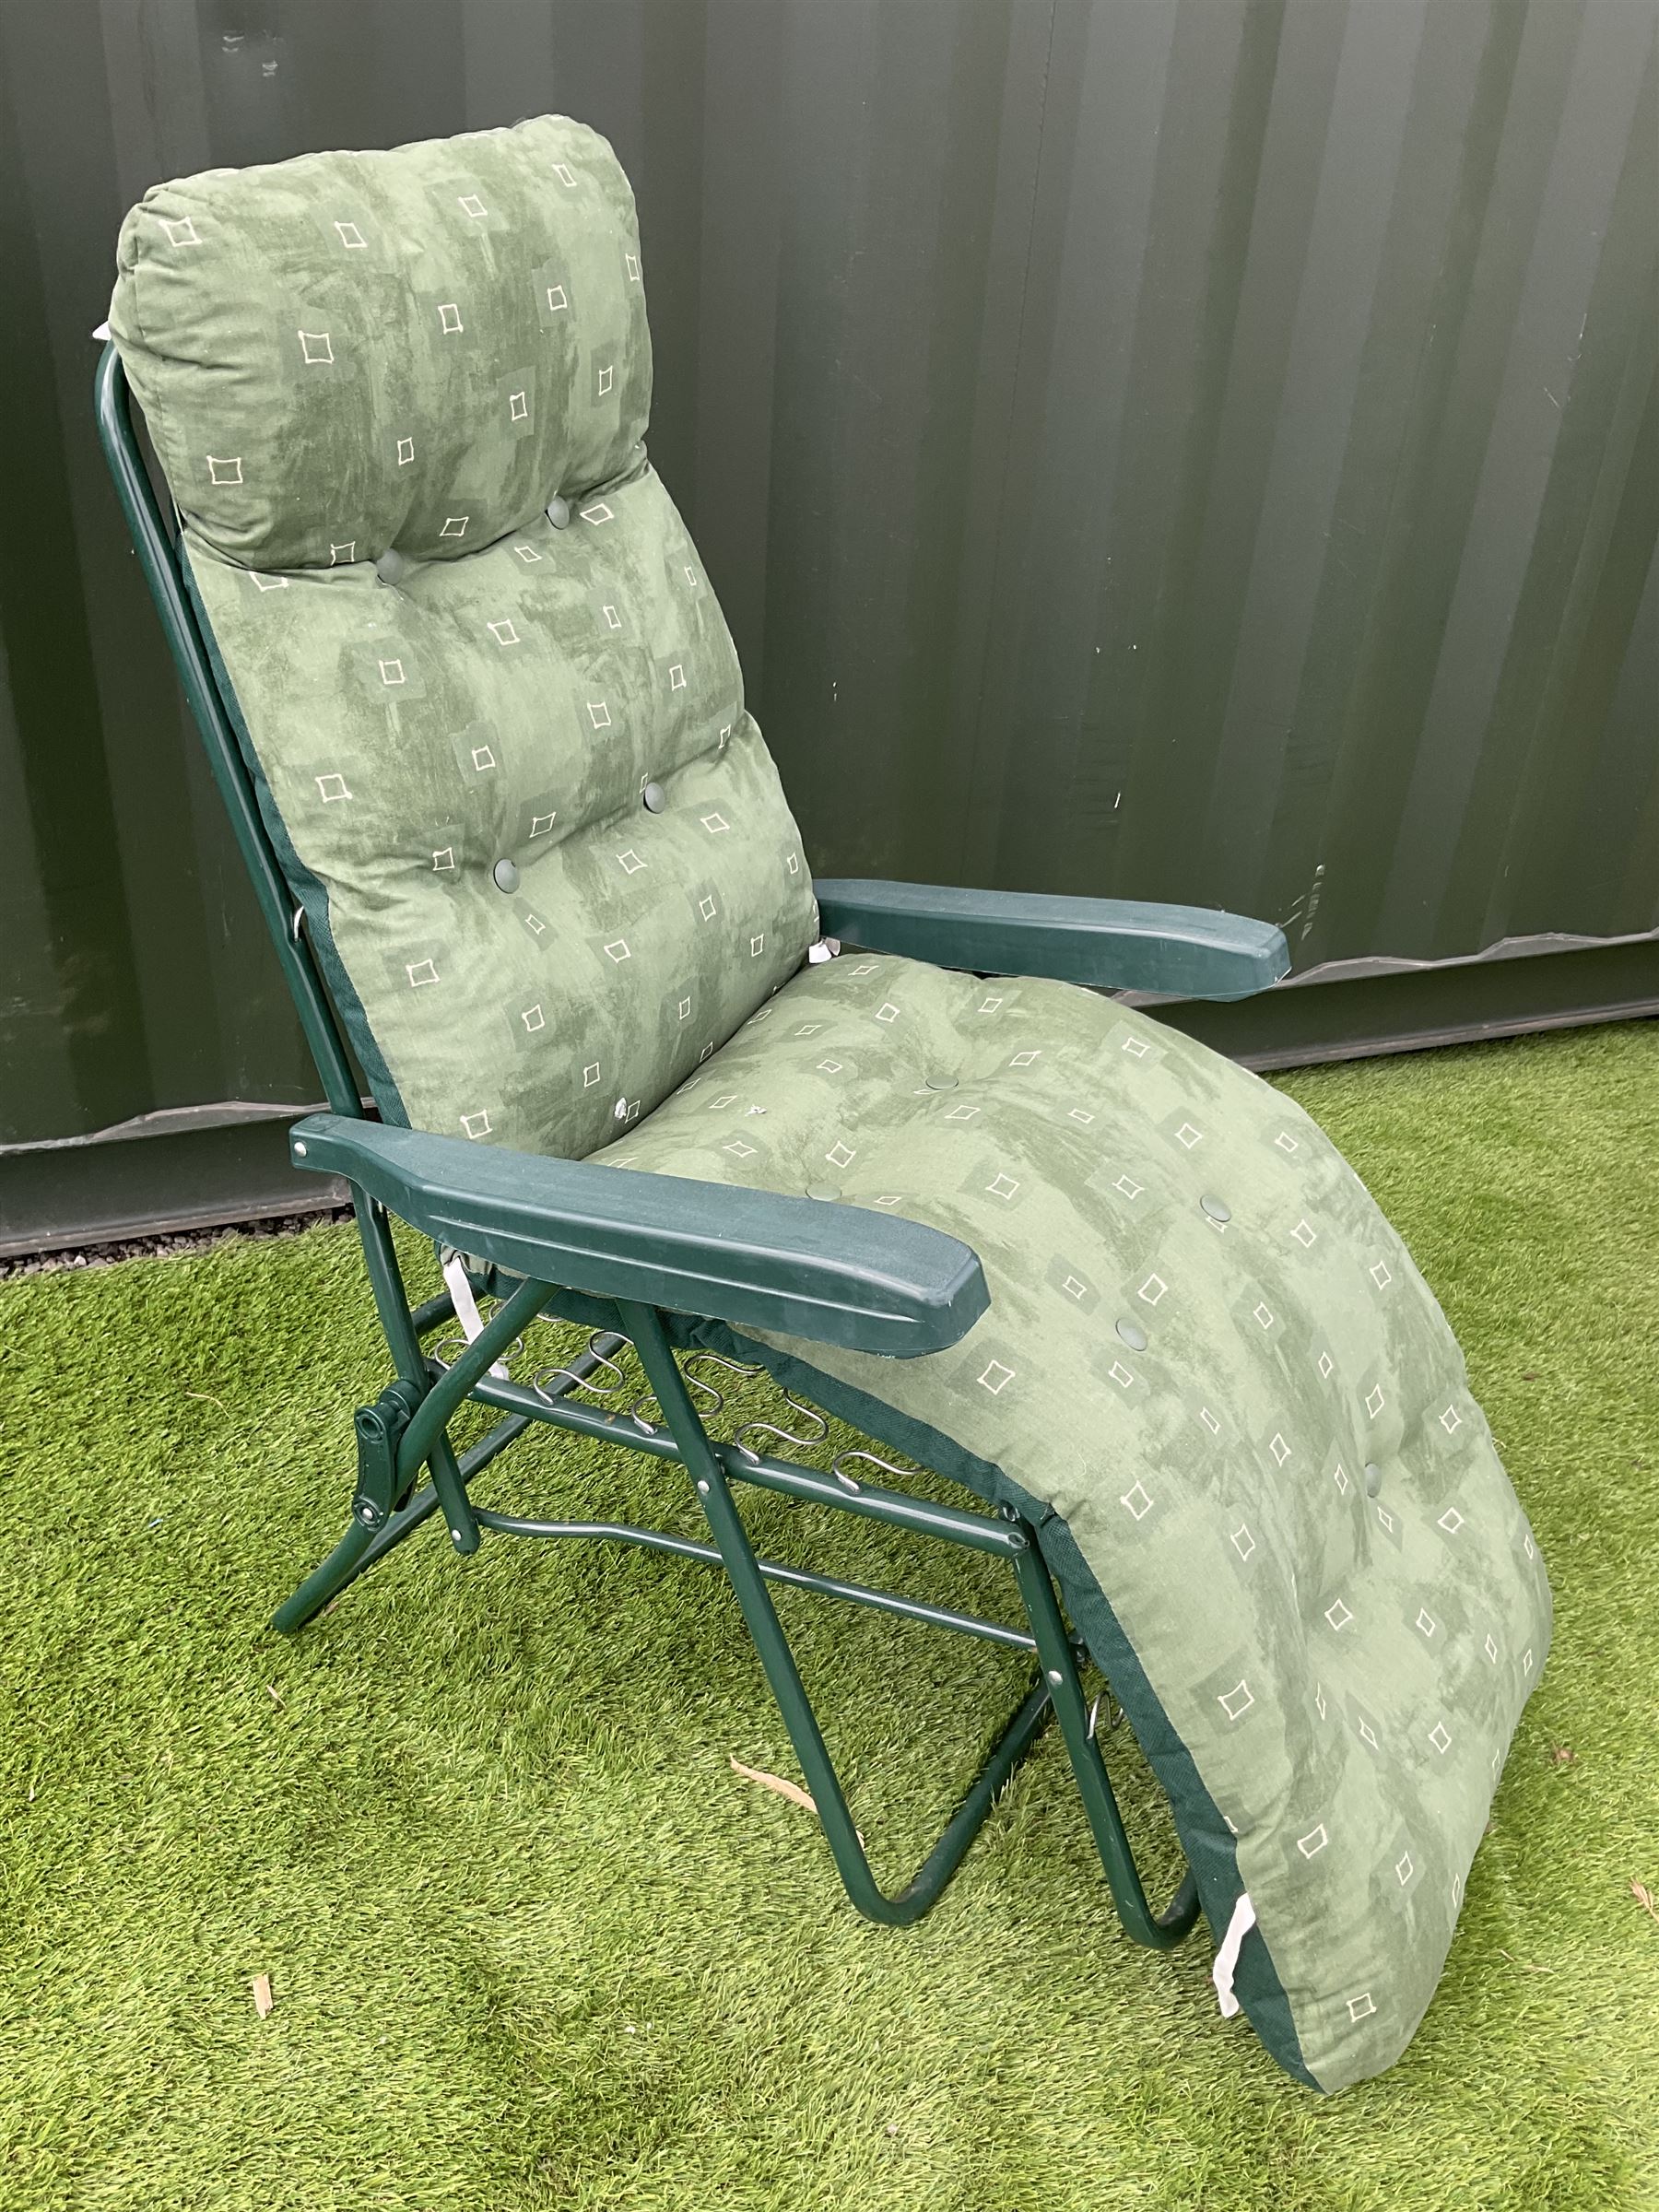 Pair of metal garden relaxer chairs - Image 2 of 4